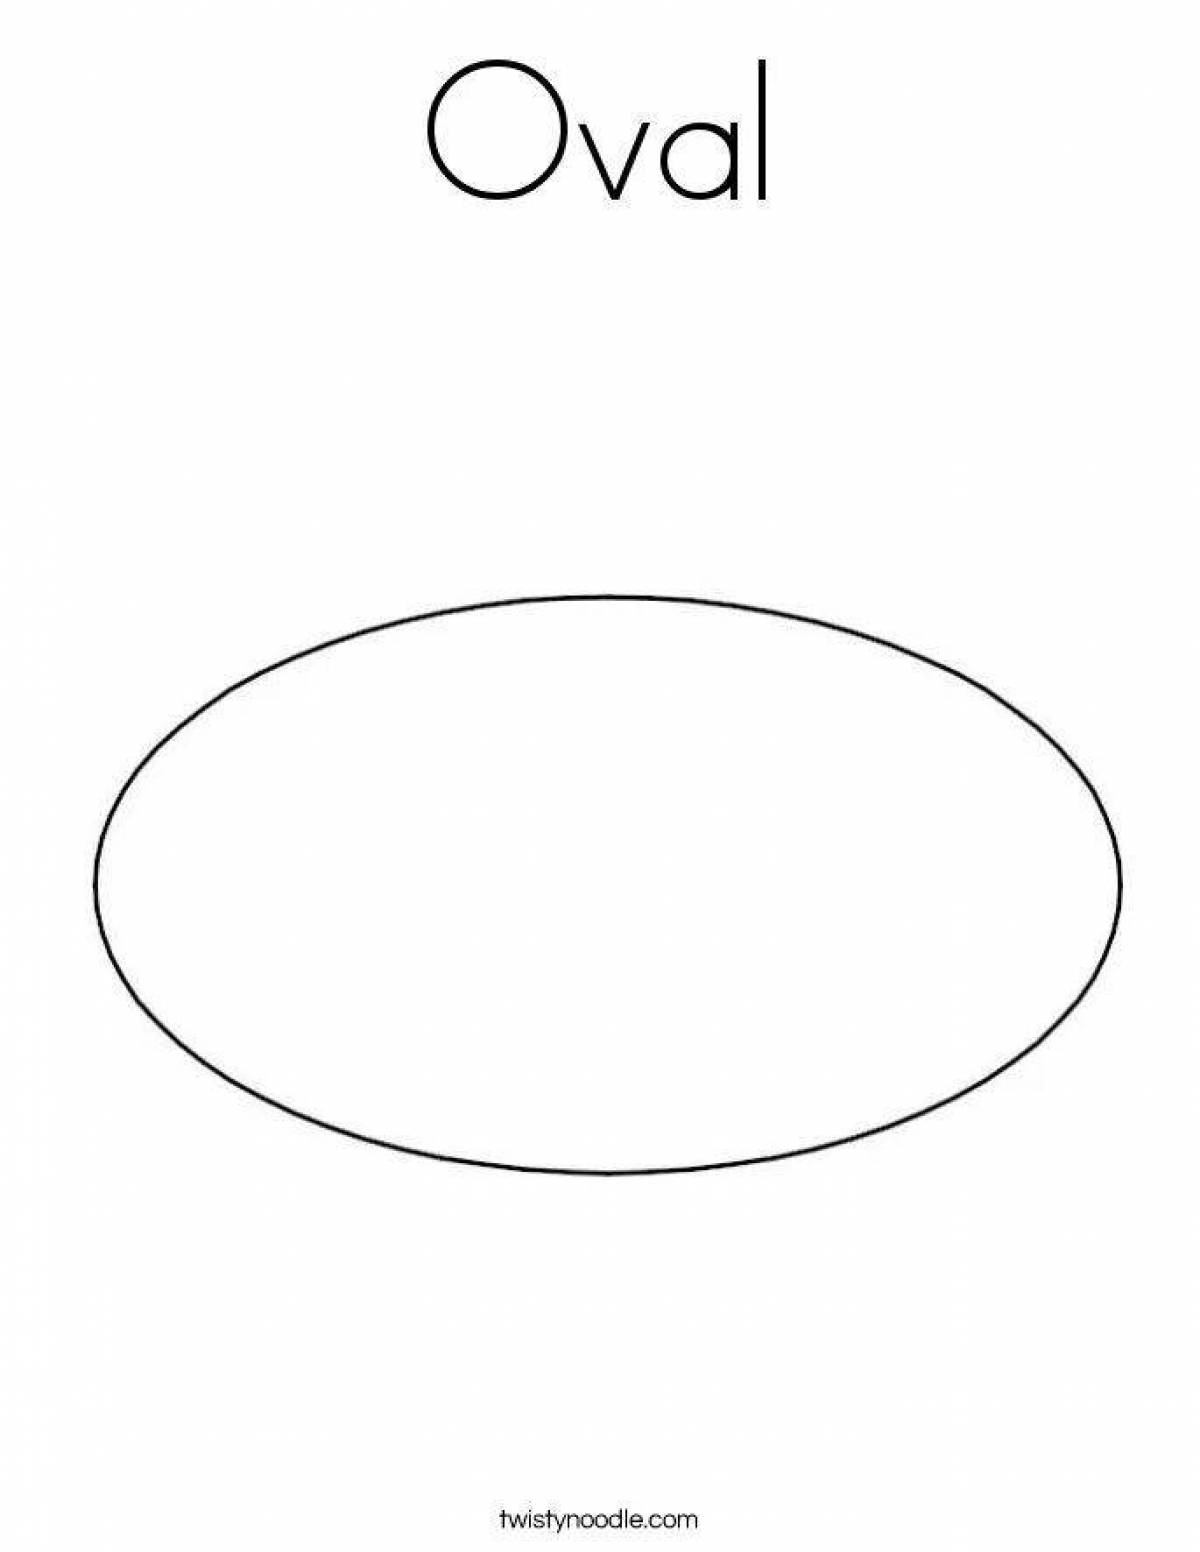 Animated oval coloring page